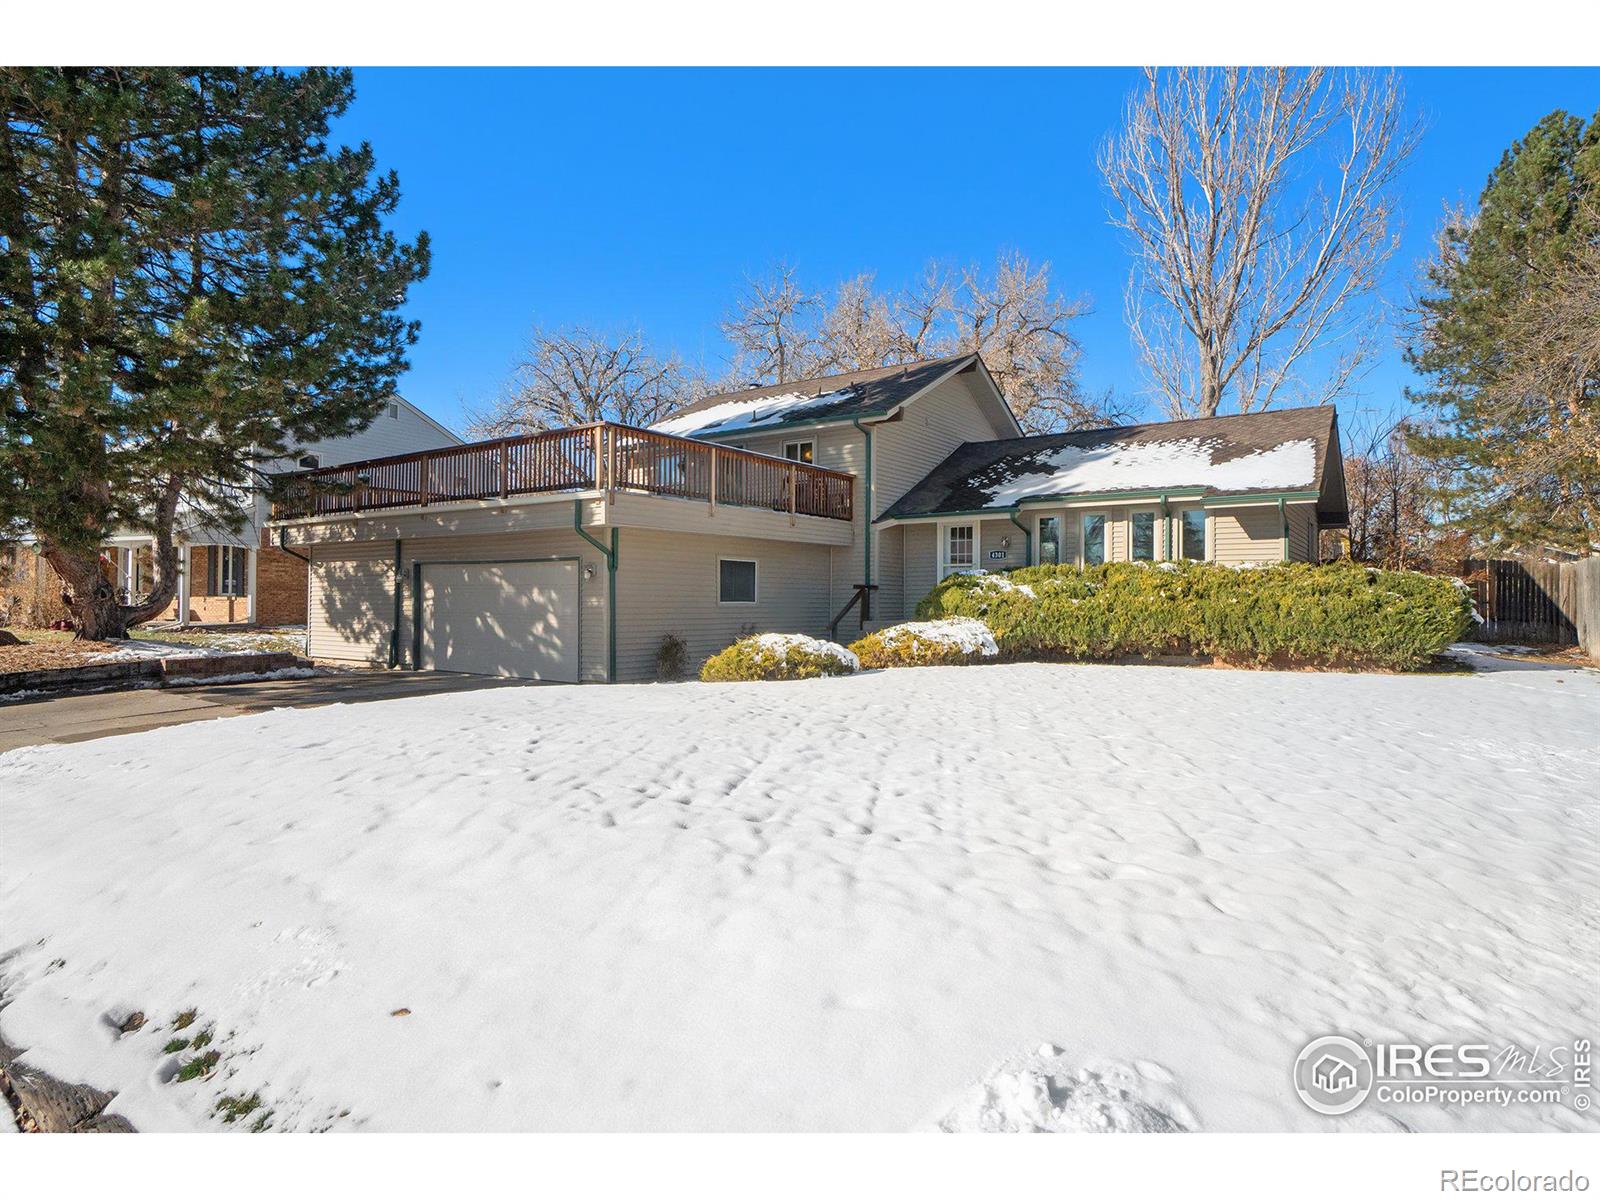 Report Image for 4301 W 21st St Rd,Greeley, Colorado